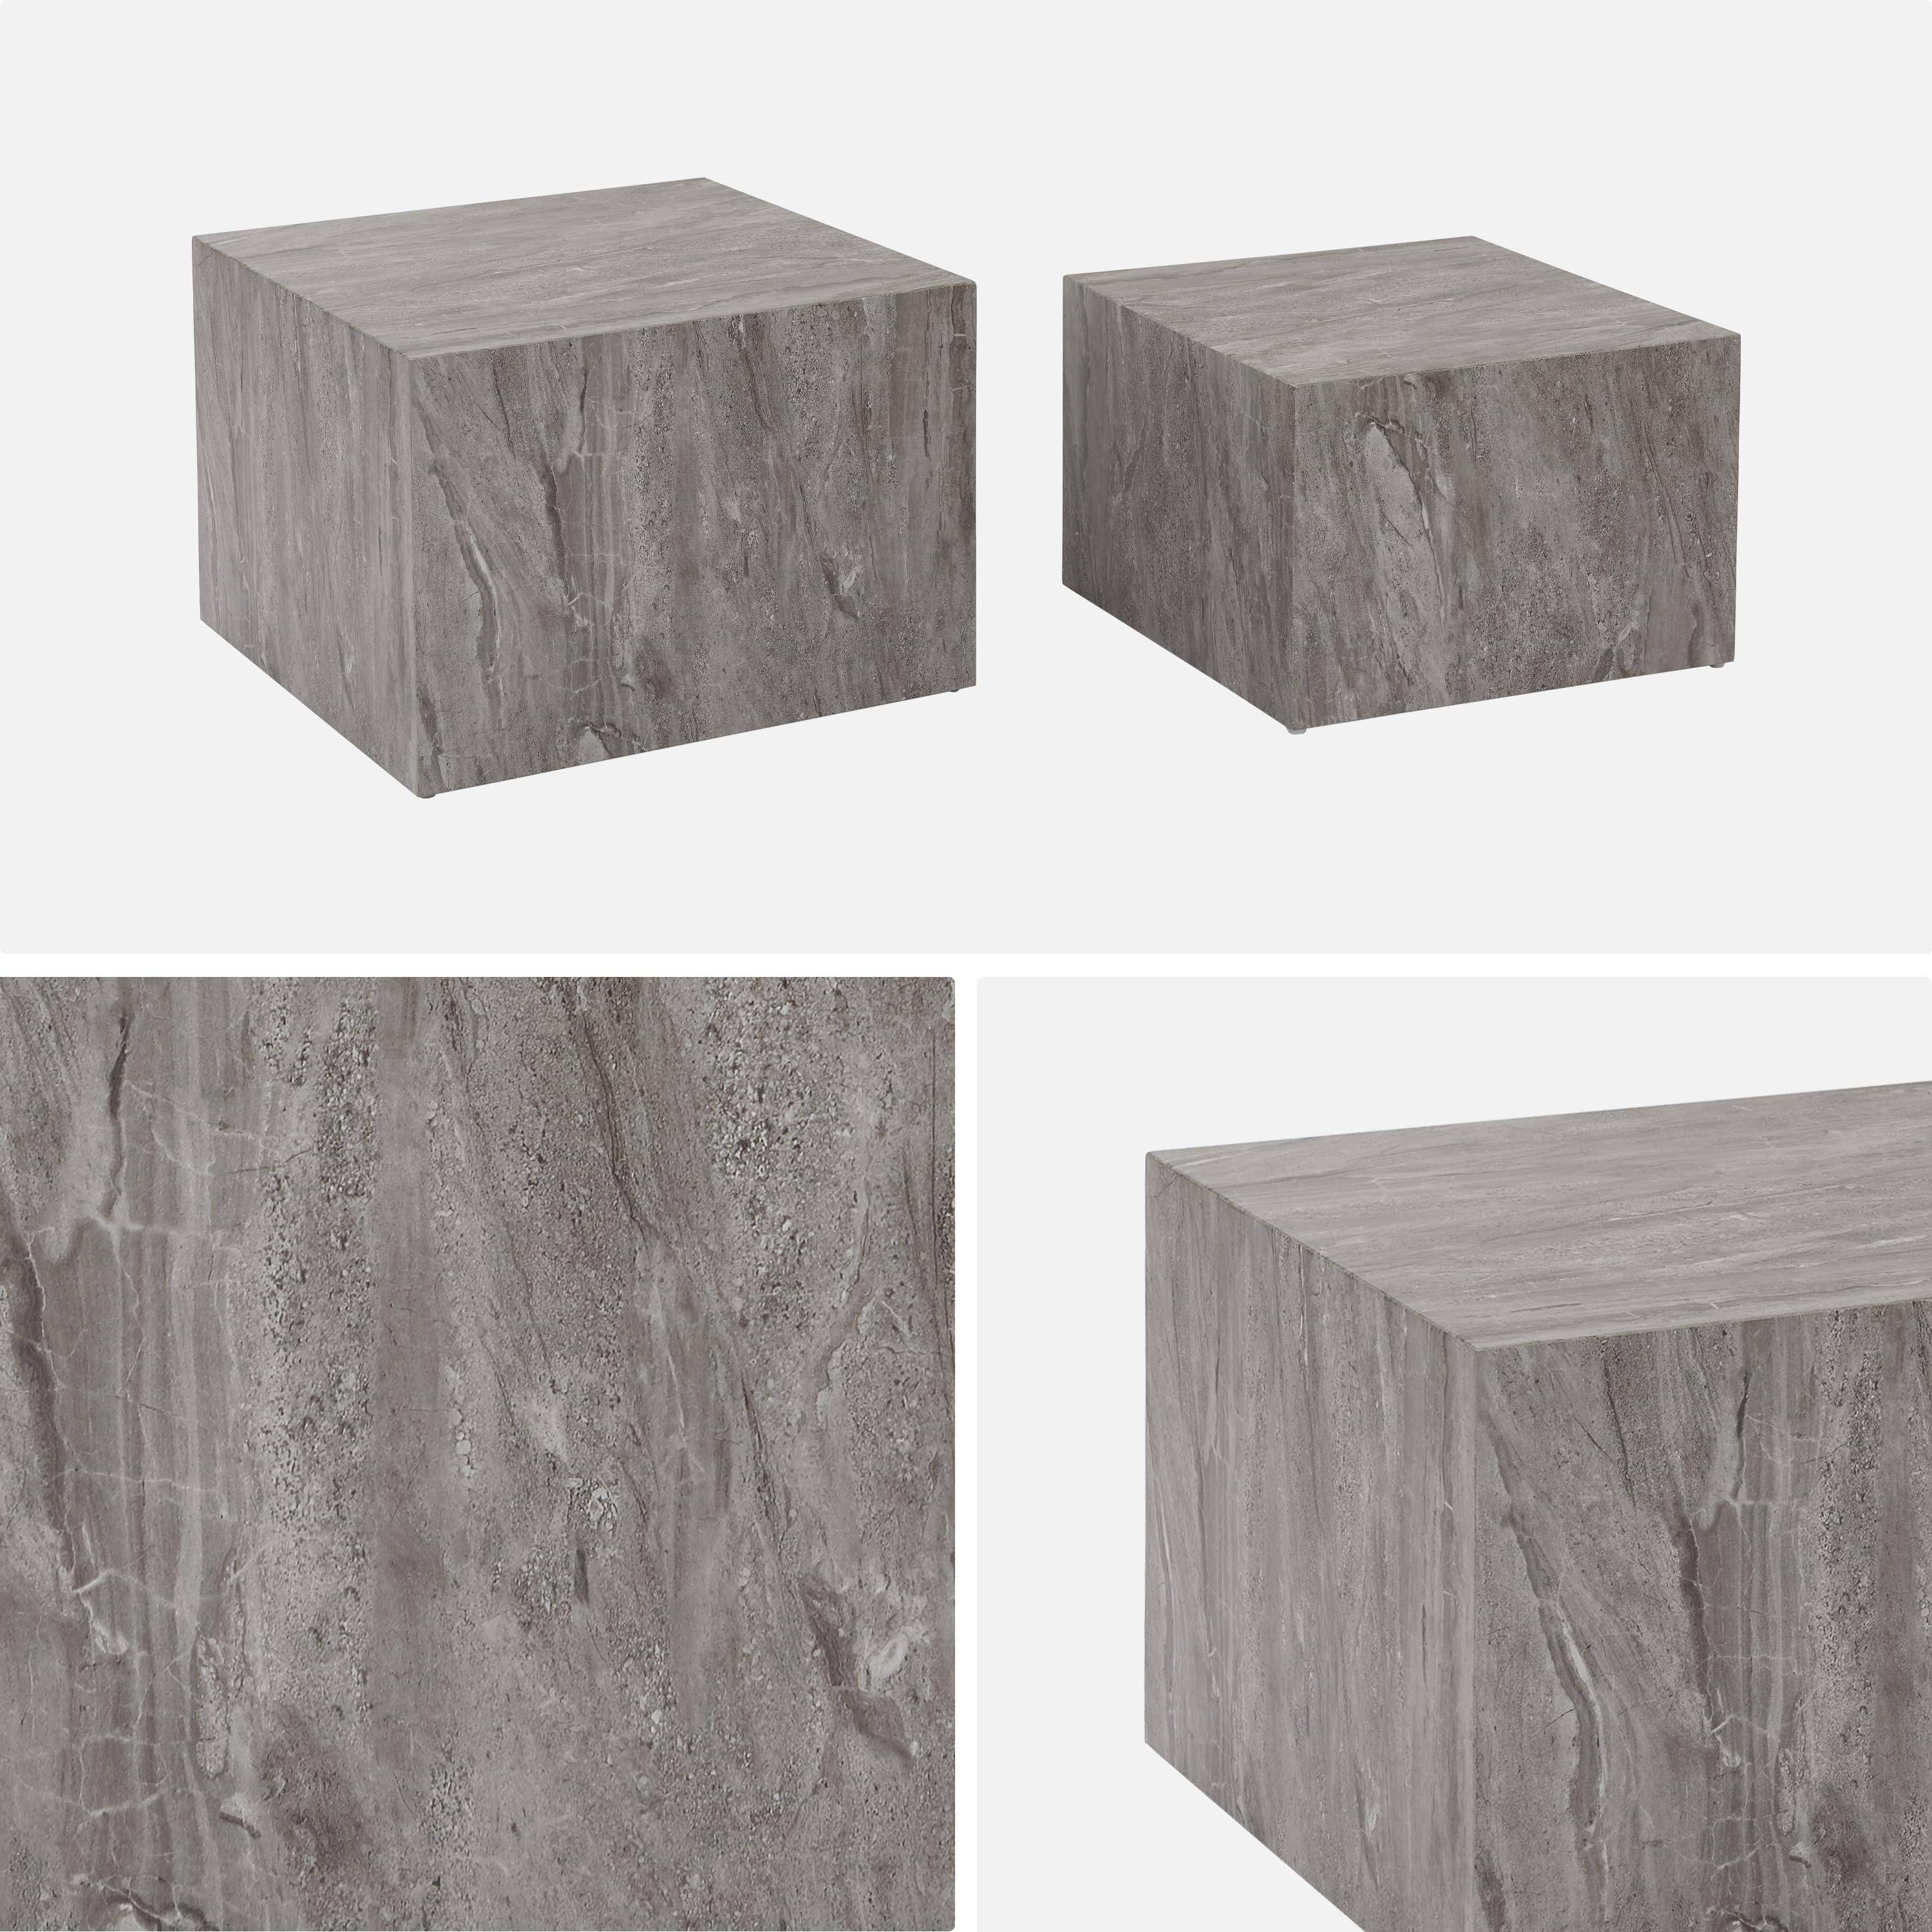 Set of 2 square coffee tables with marble effect, grey, L50xW50xH33cm &  L58xW58xH40cm, Paros,sweeek,Photo6